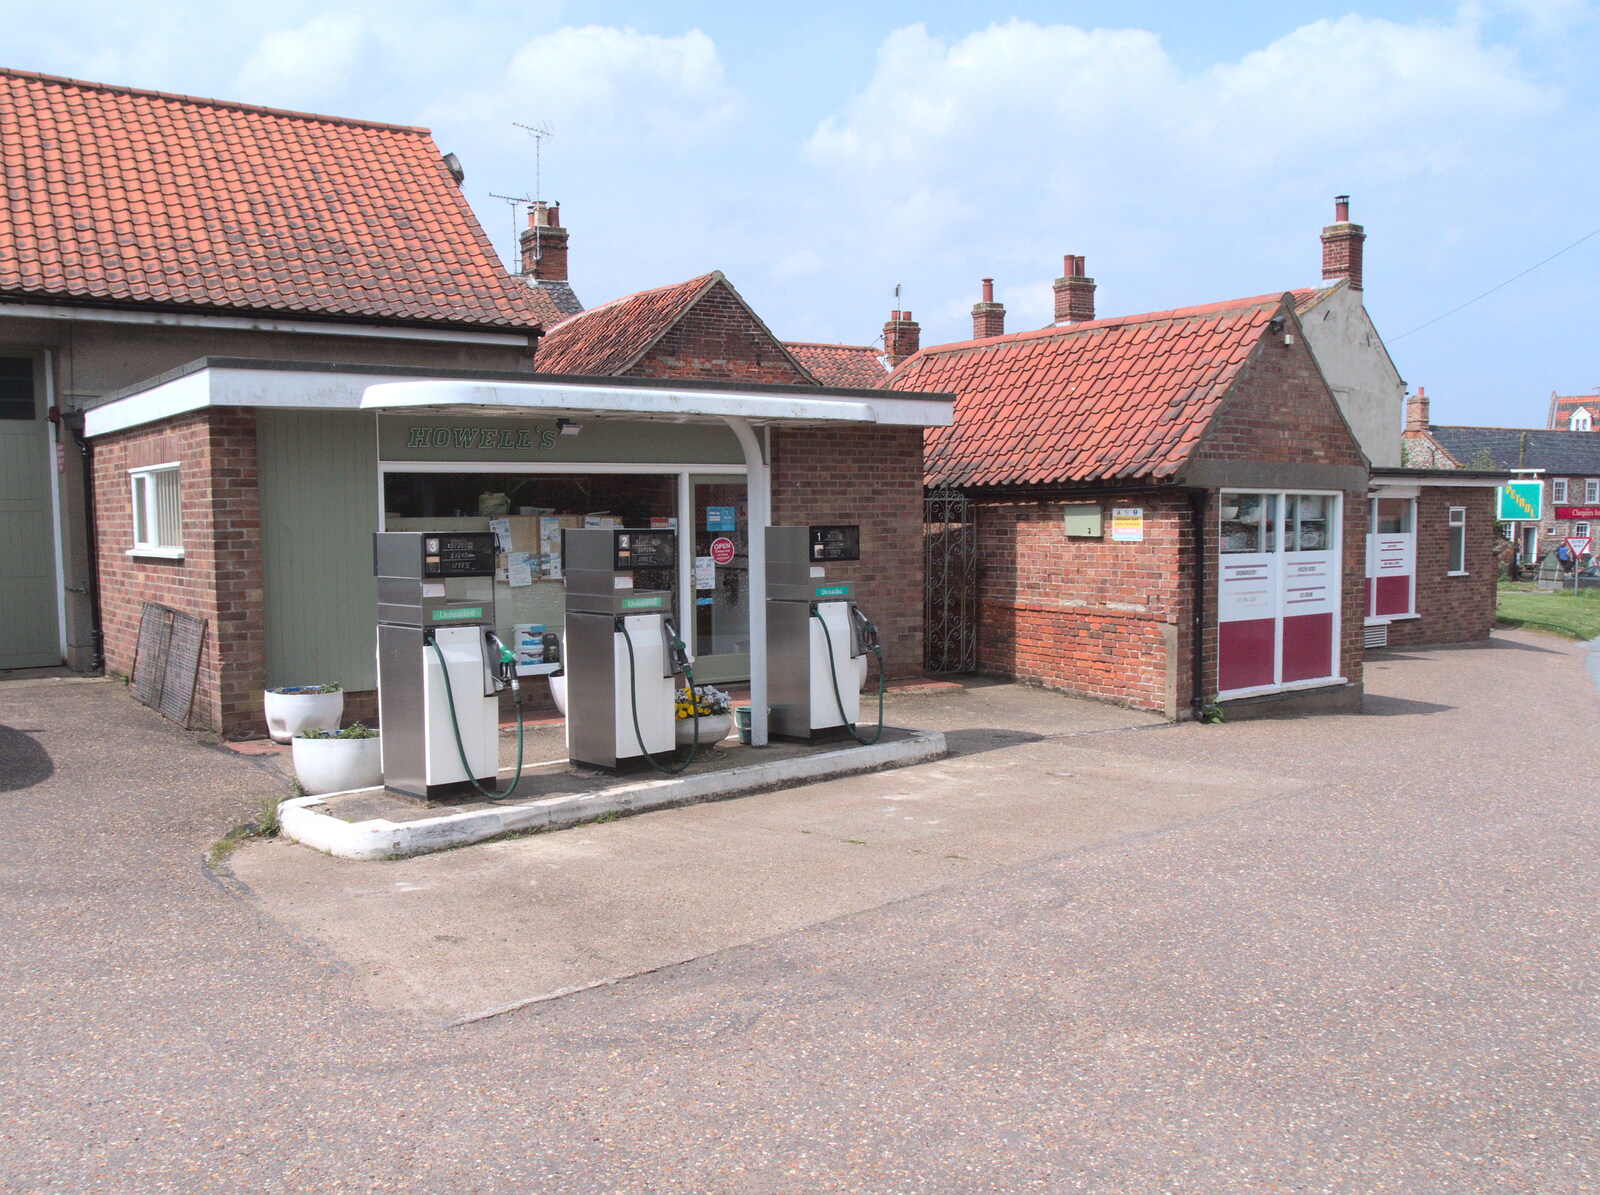 Howell's petrol station in Binham from The BSCC Weekend Away, Holt, Norfolk - 12th May 2018